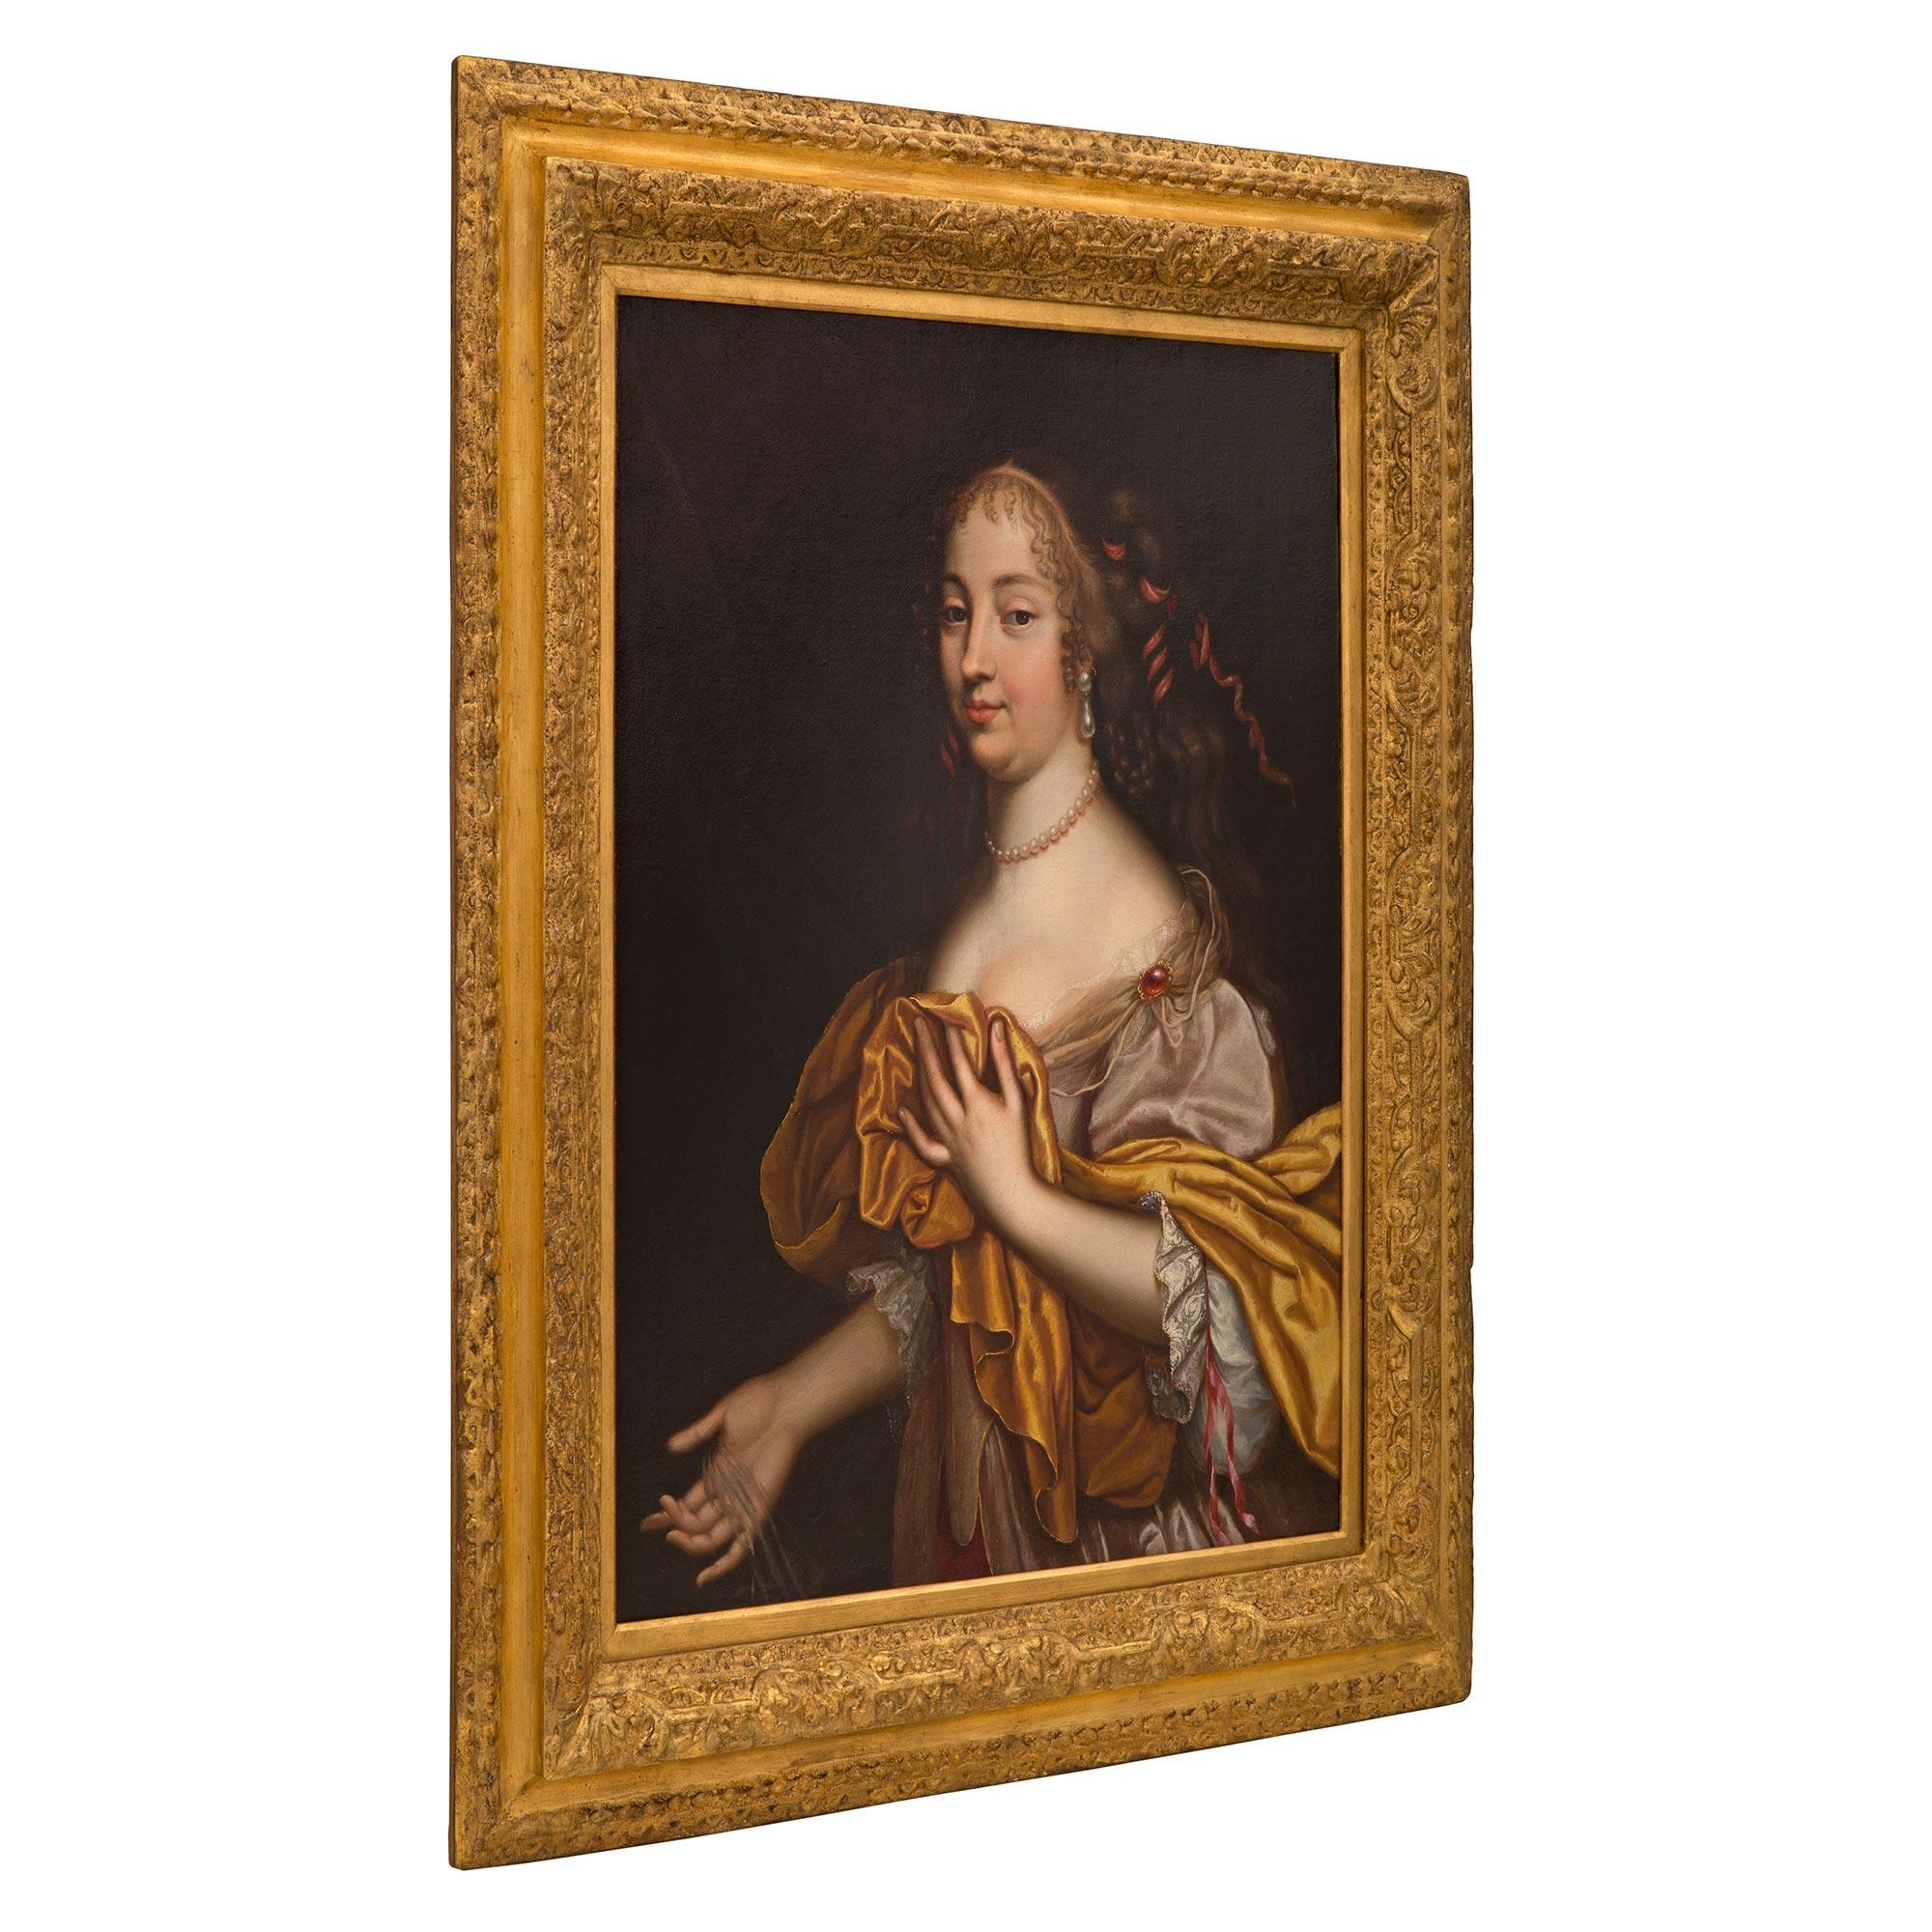 A beautiful and wonderfully executed English 19th century Louis XVI st. oil on canvas painting in the manner of Sir Peter Lely. The painting depicts a beautiful maiden dressed in an elegant flowing robe with a red jewel clasp. She is wearing an